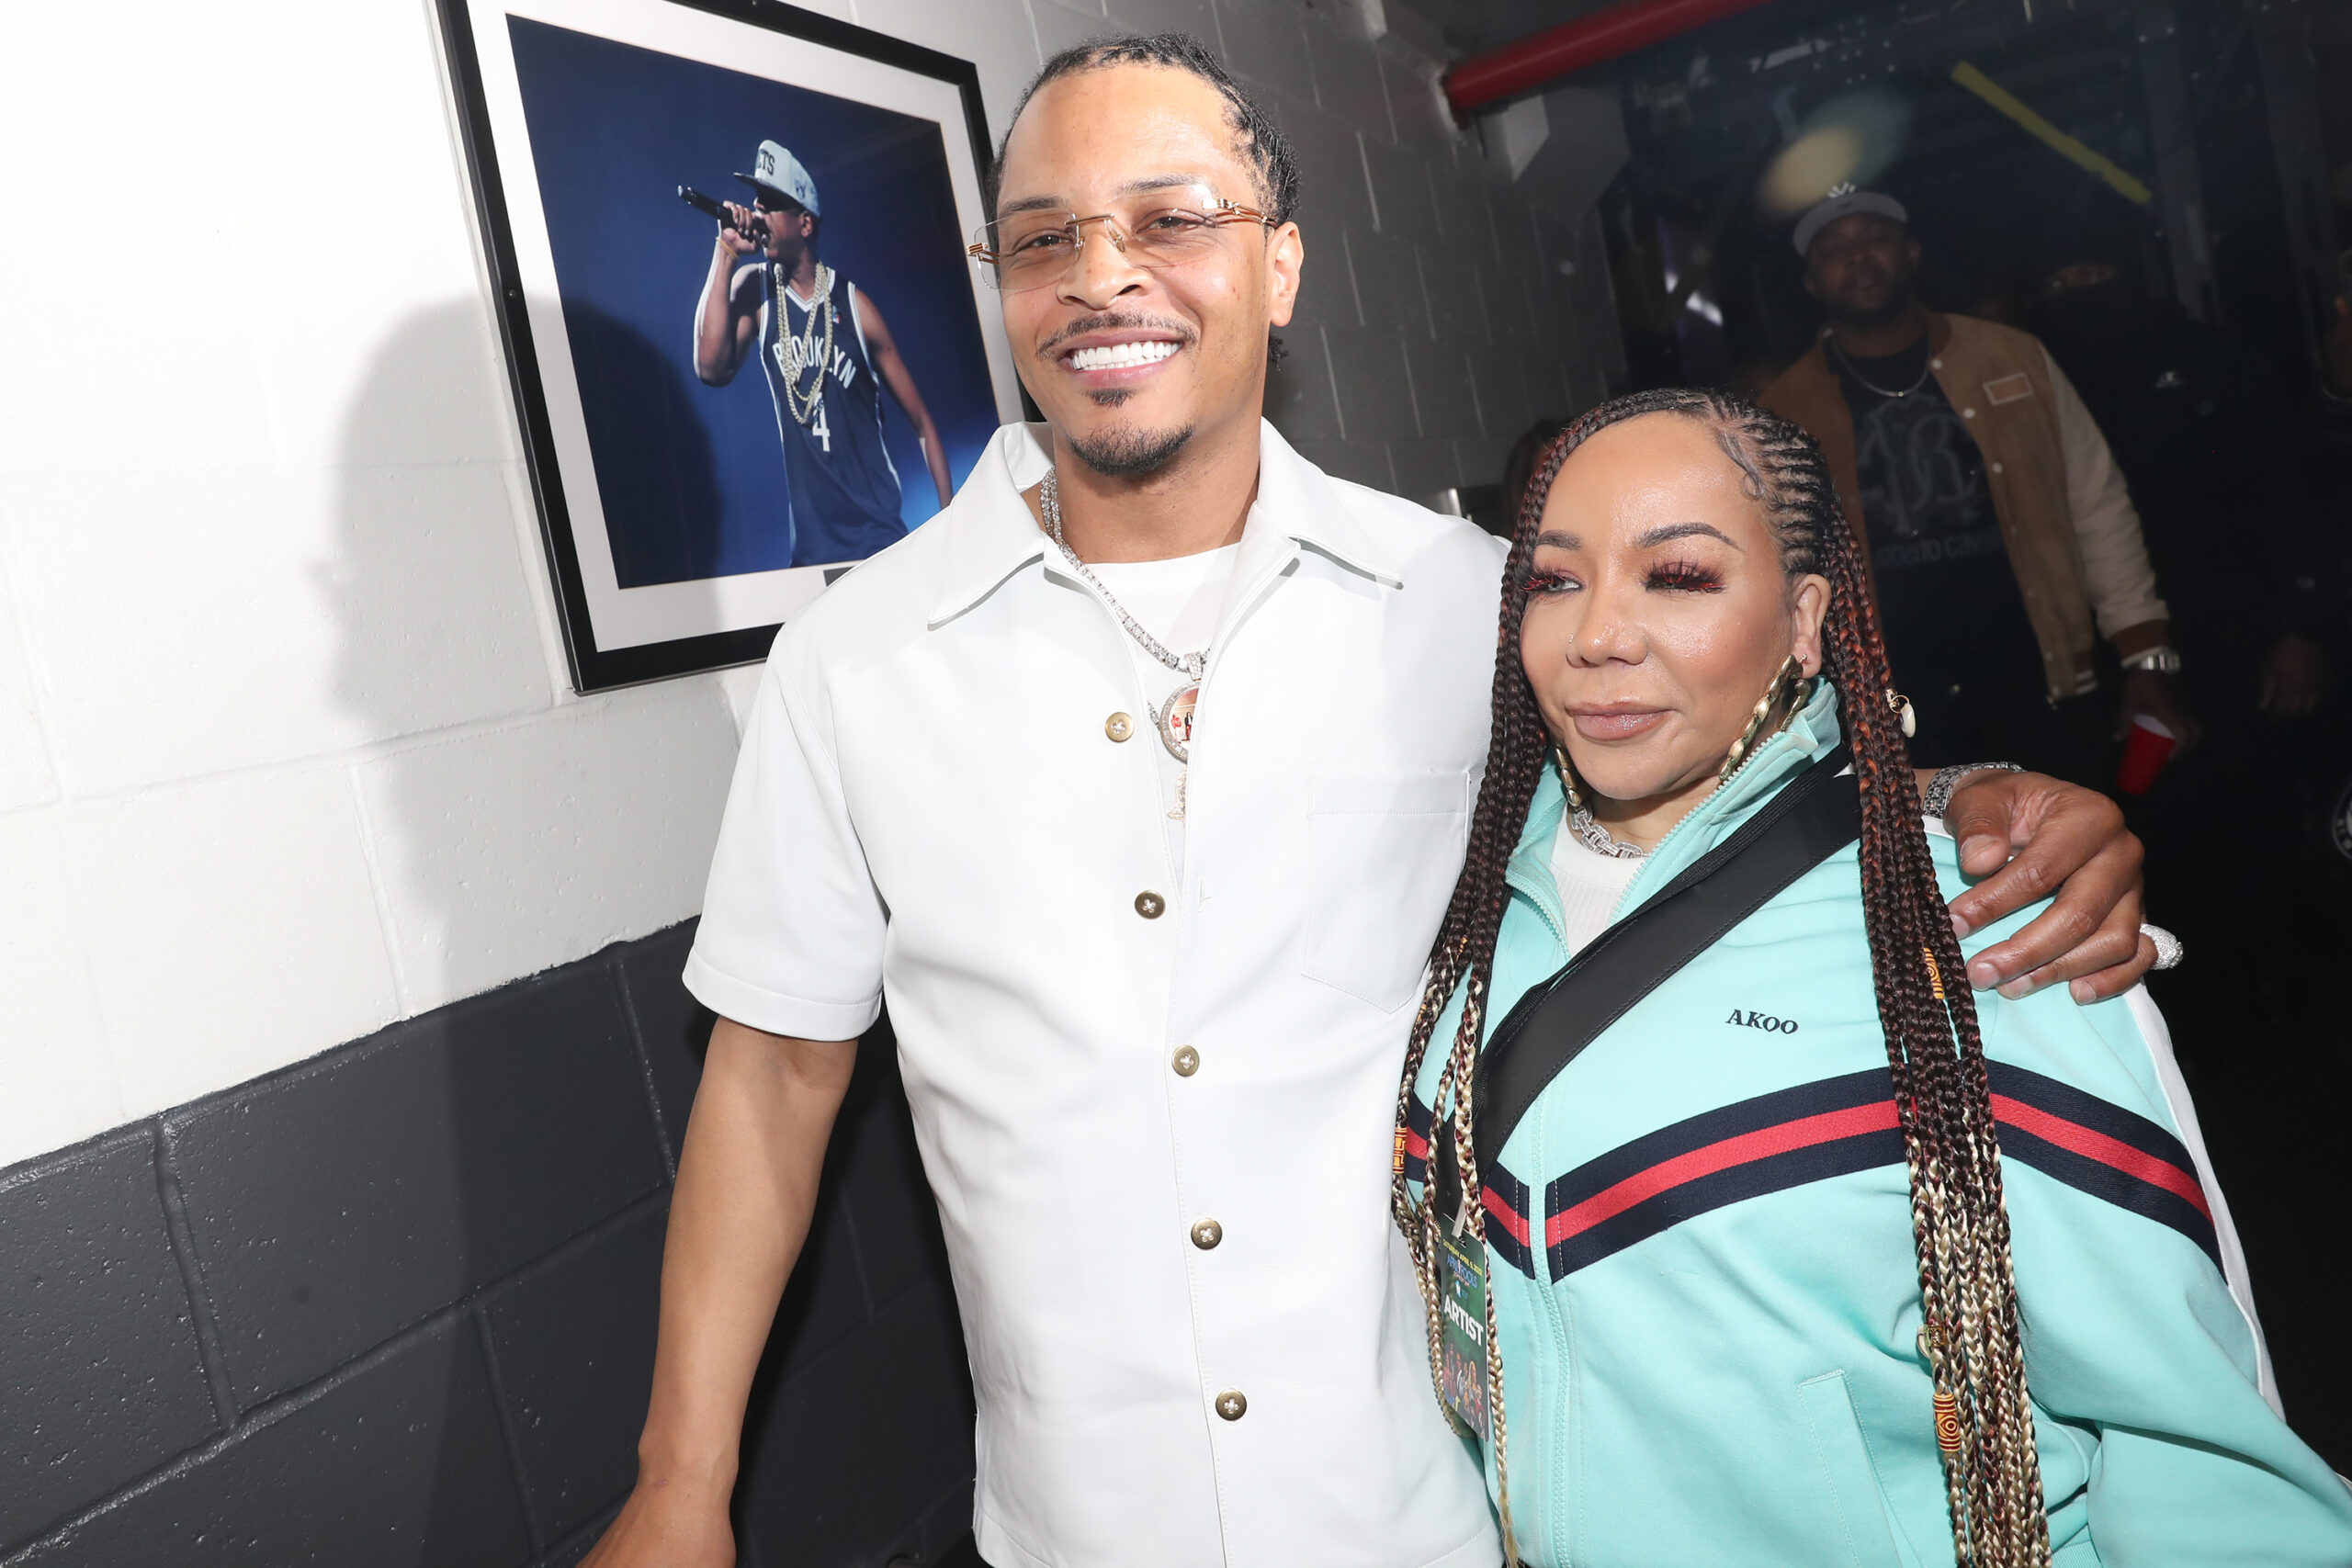 T.I. Wins Small Victory In Court Against Woman Who Says He Held Gun To Her Head